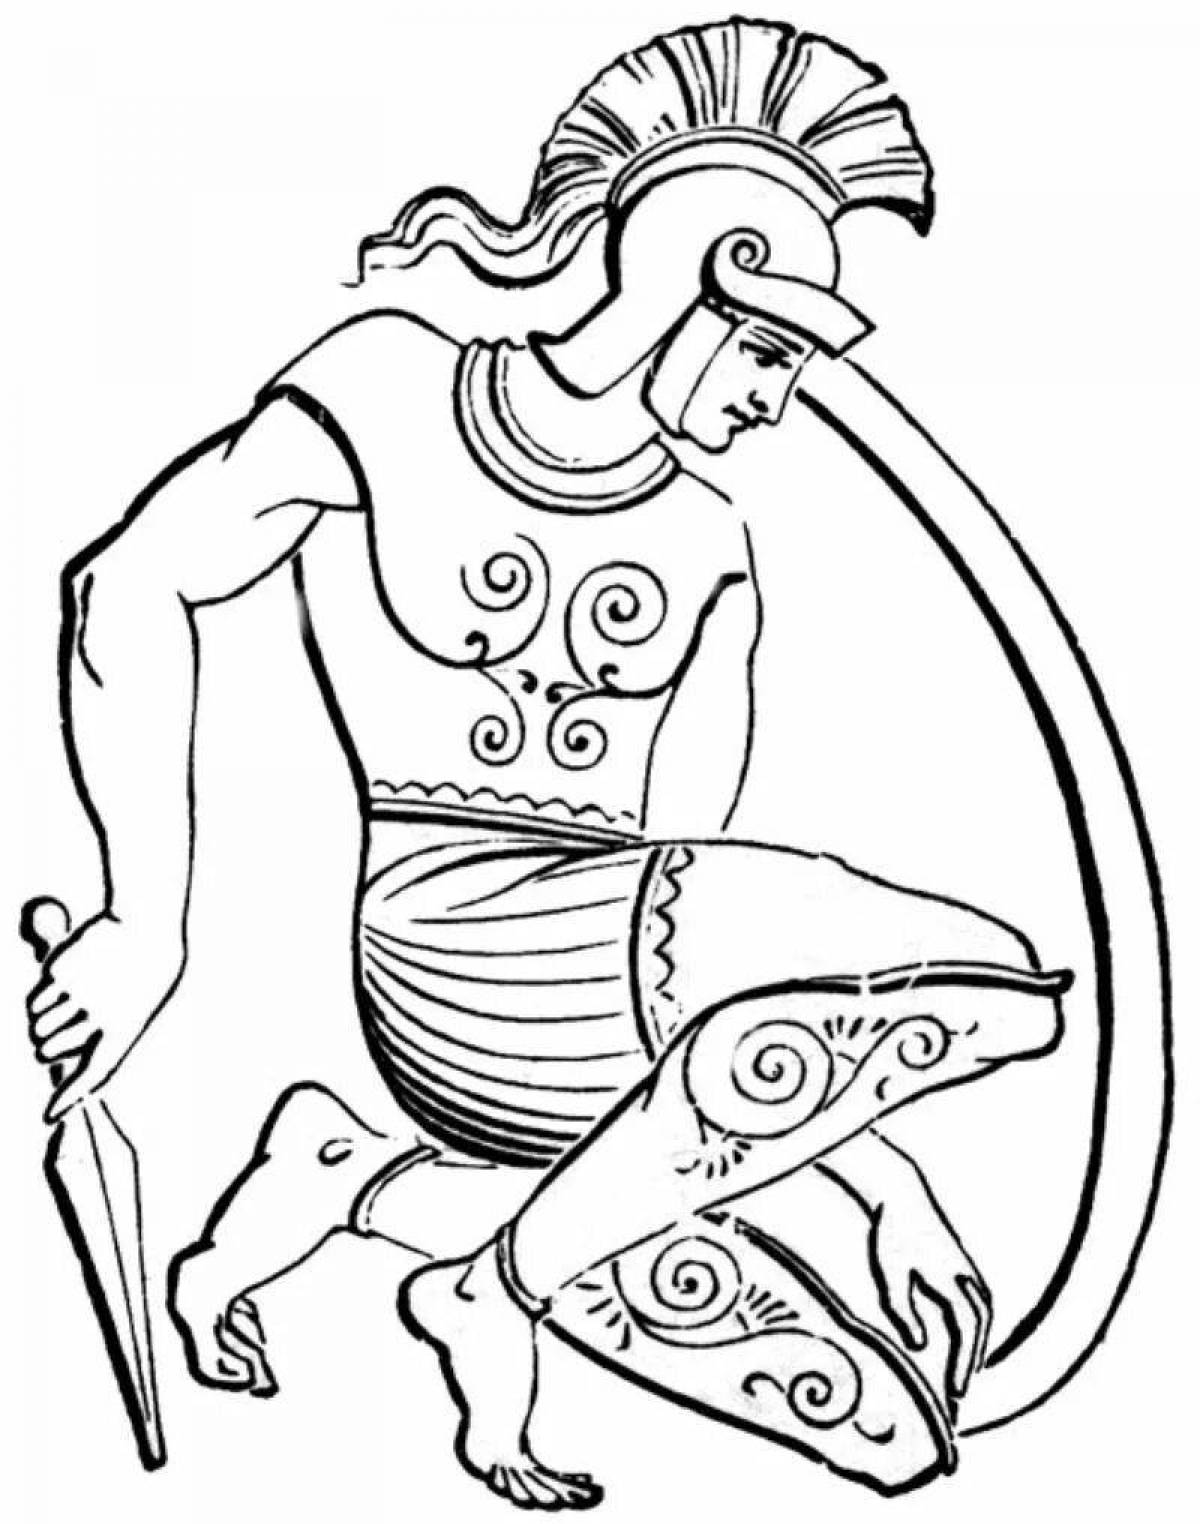 Coloring page exalted ancient greek gods